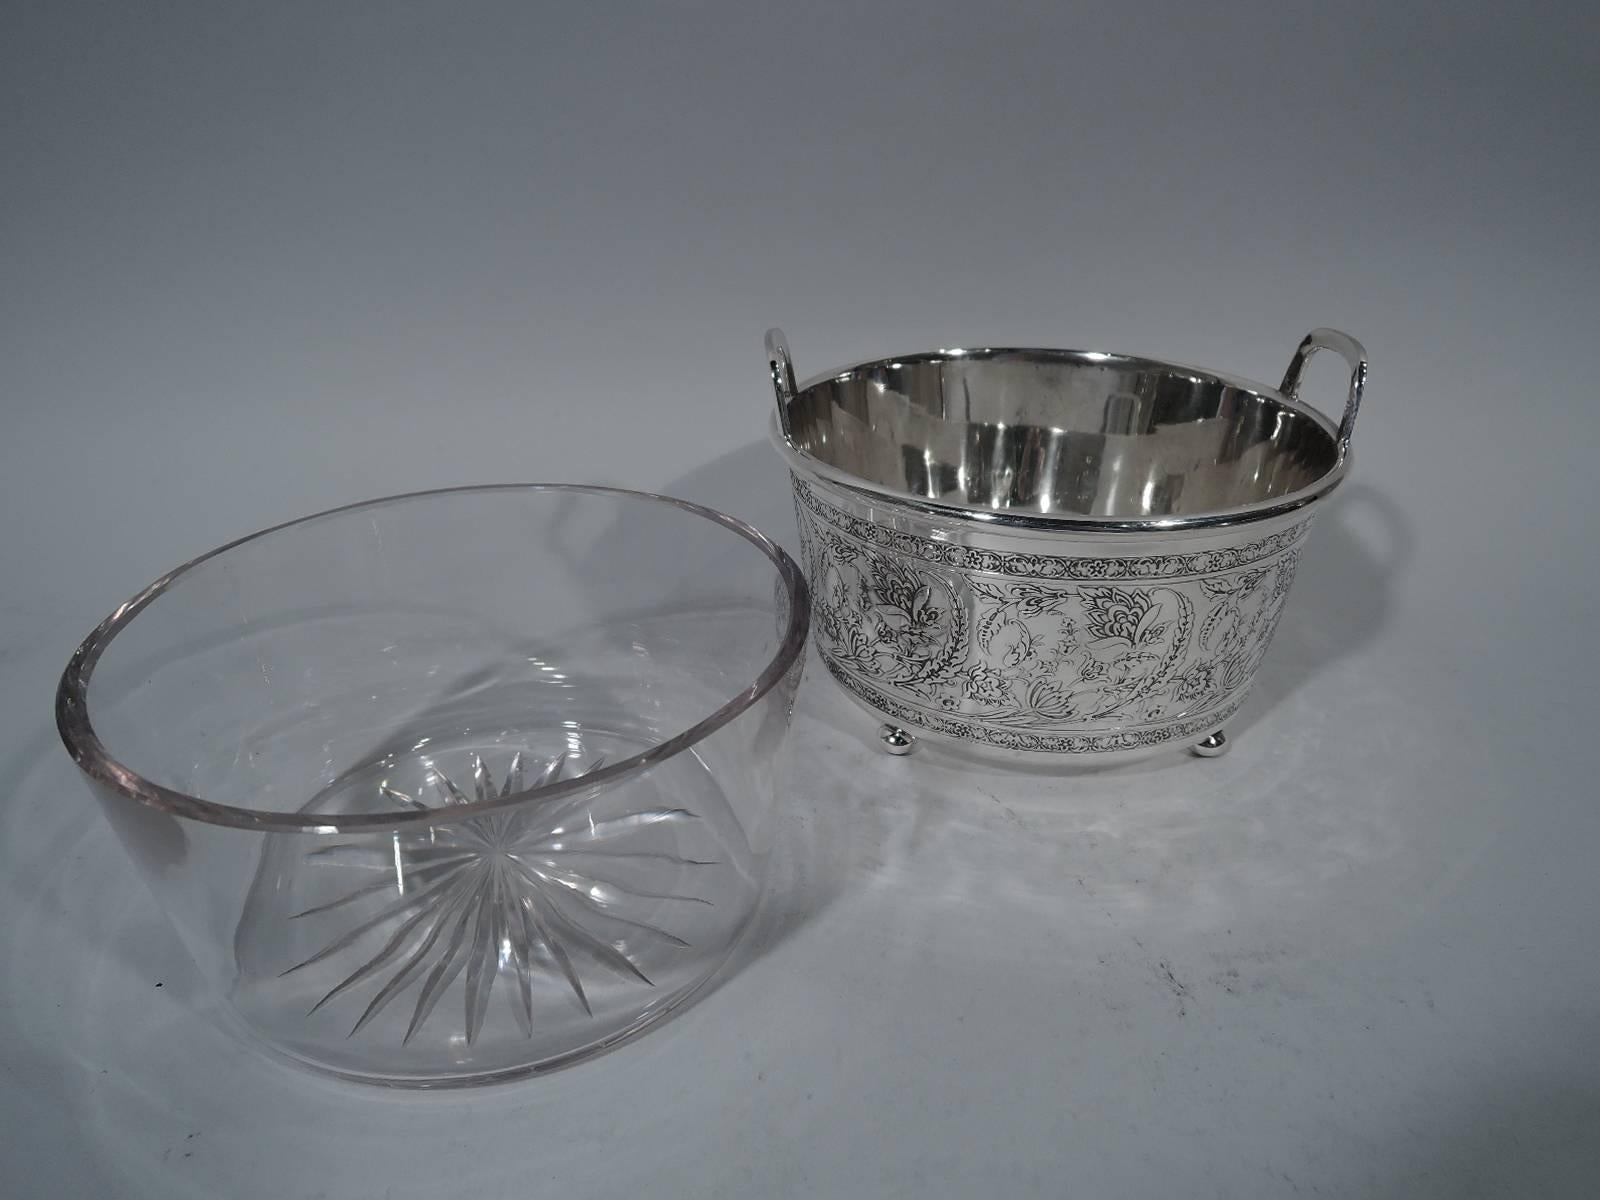 Art Nouveau sterling silver ice bucket. Made by Tiffany & Co. in New York, circa 1908. Straight and tapering sides, rim-mounted bracket handles, and four ball supports. Exterior has acid-etched scrolling and intertwining flora between